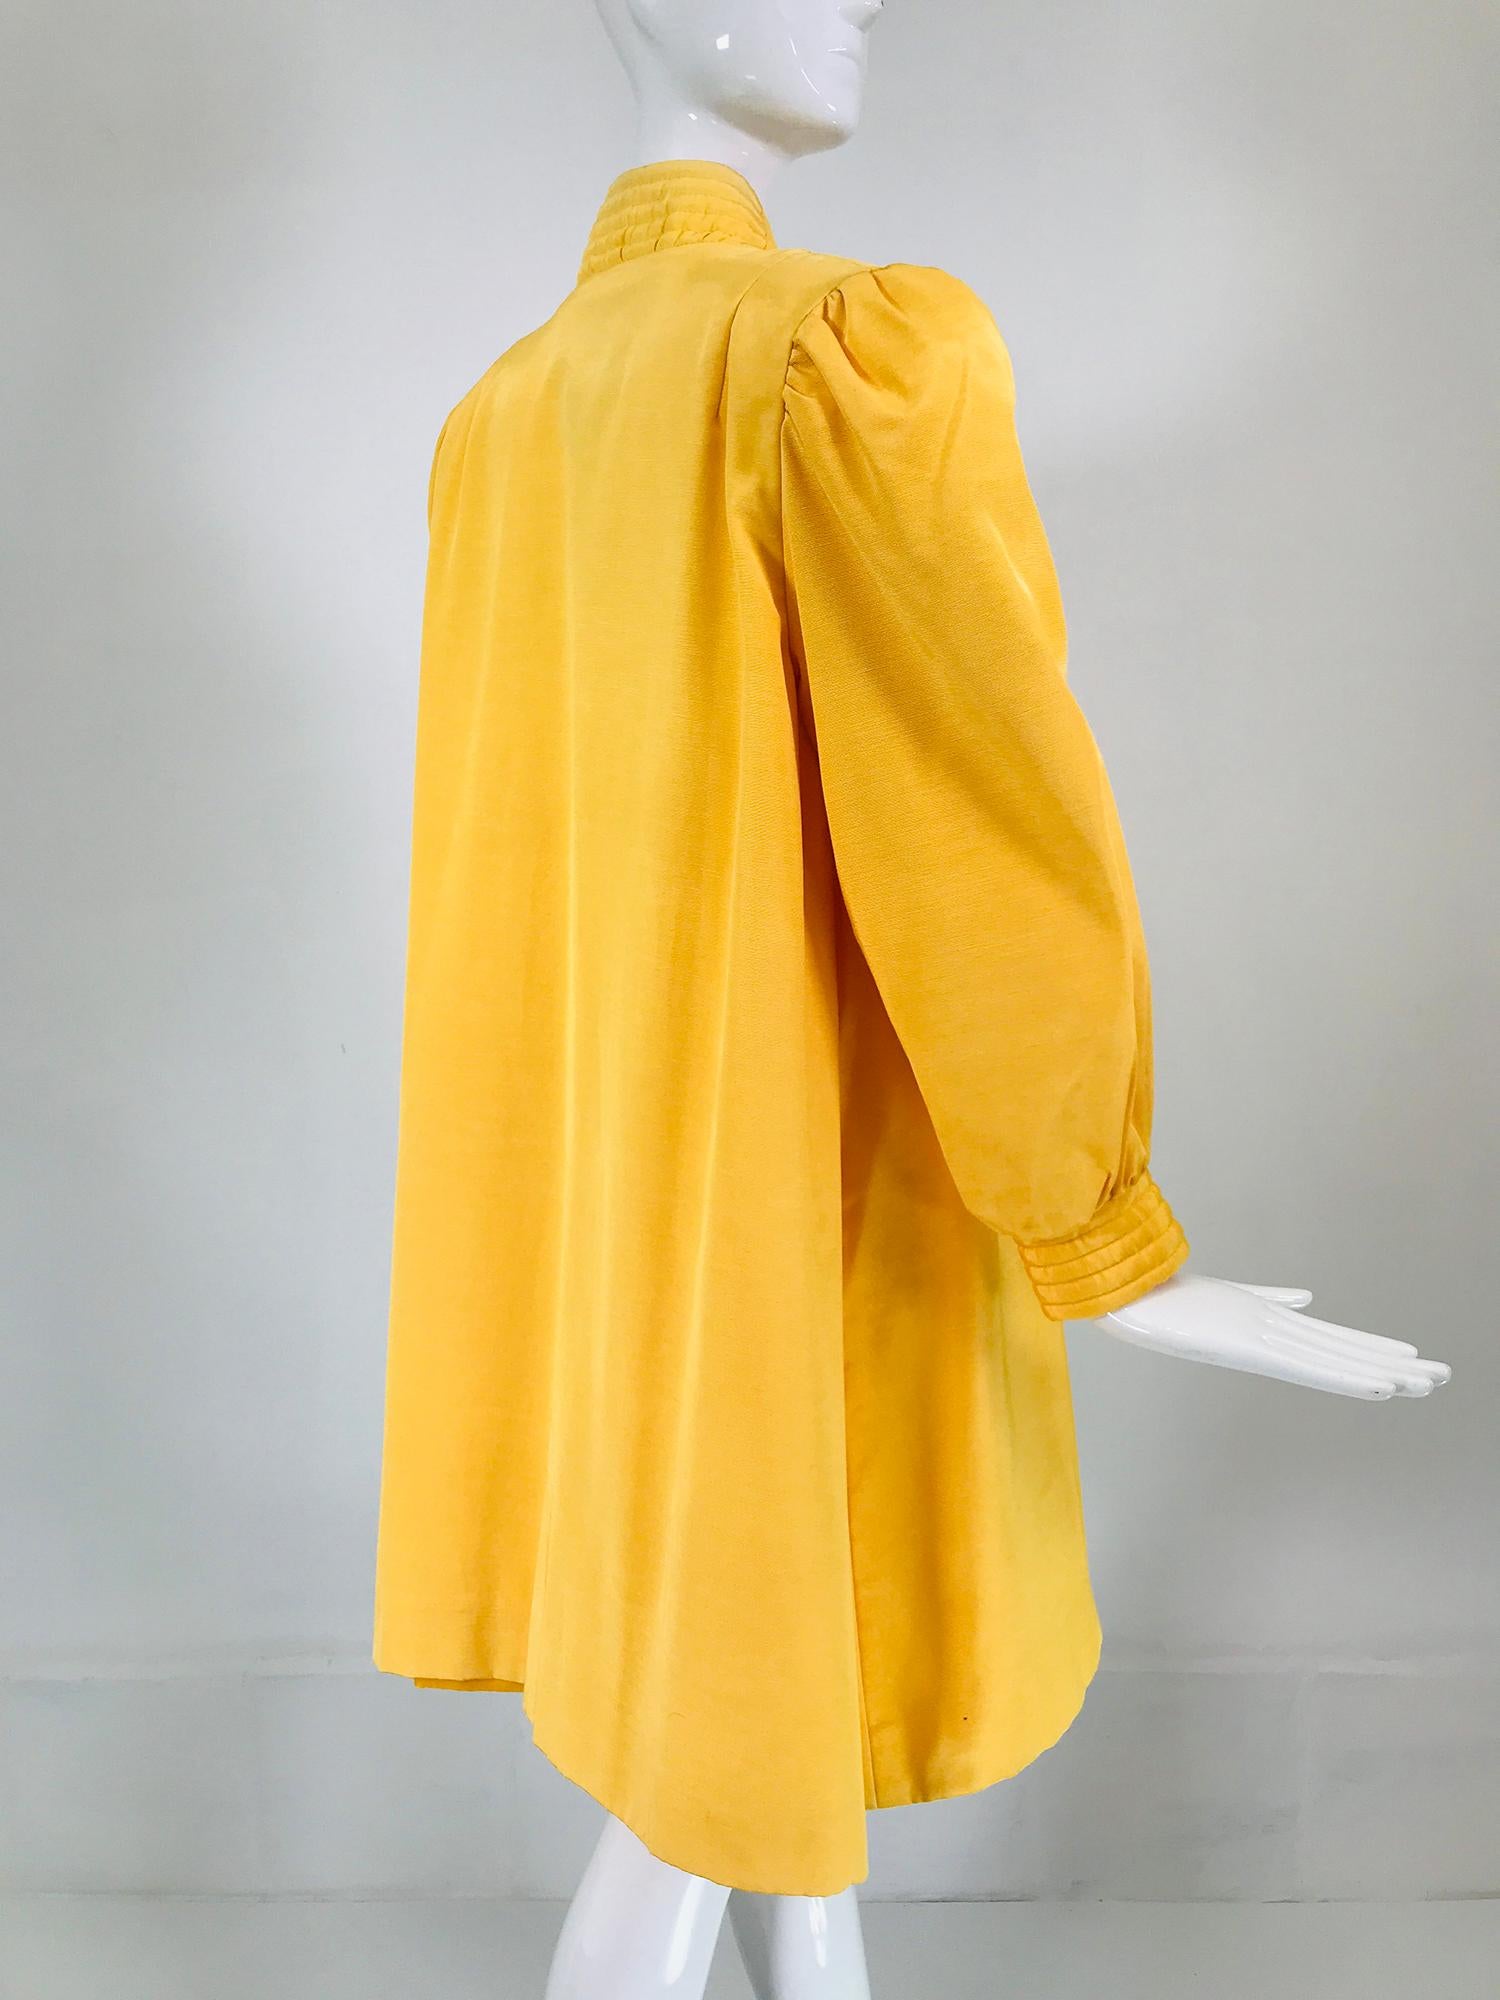 Victor Costa Mustard Yellow Faille Coat Quilted Facings & Cuffs 1980s For Sale 4